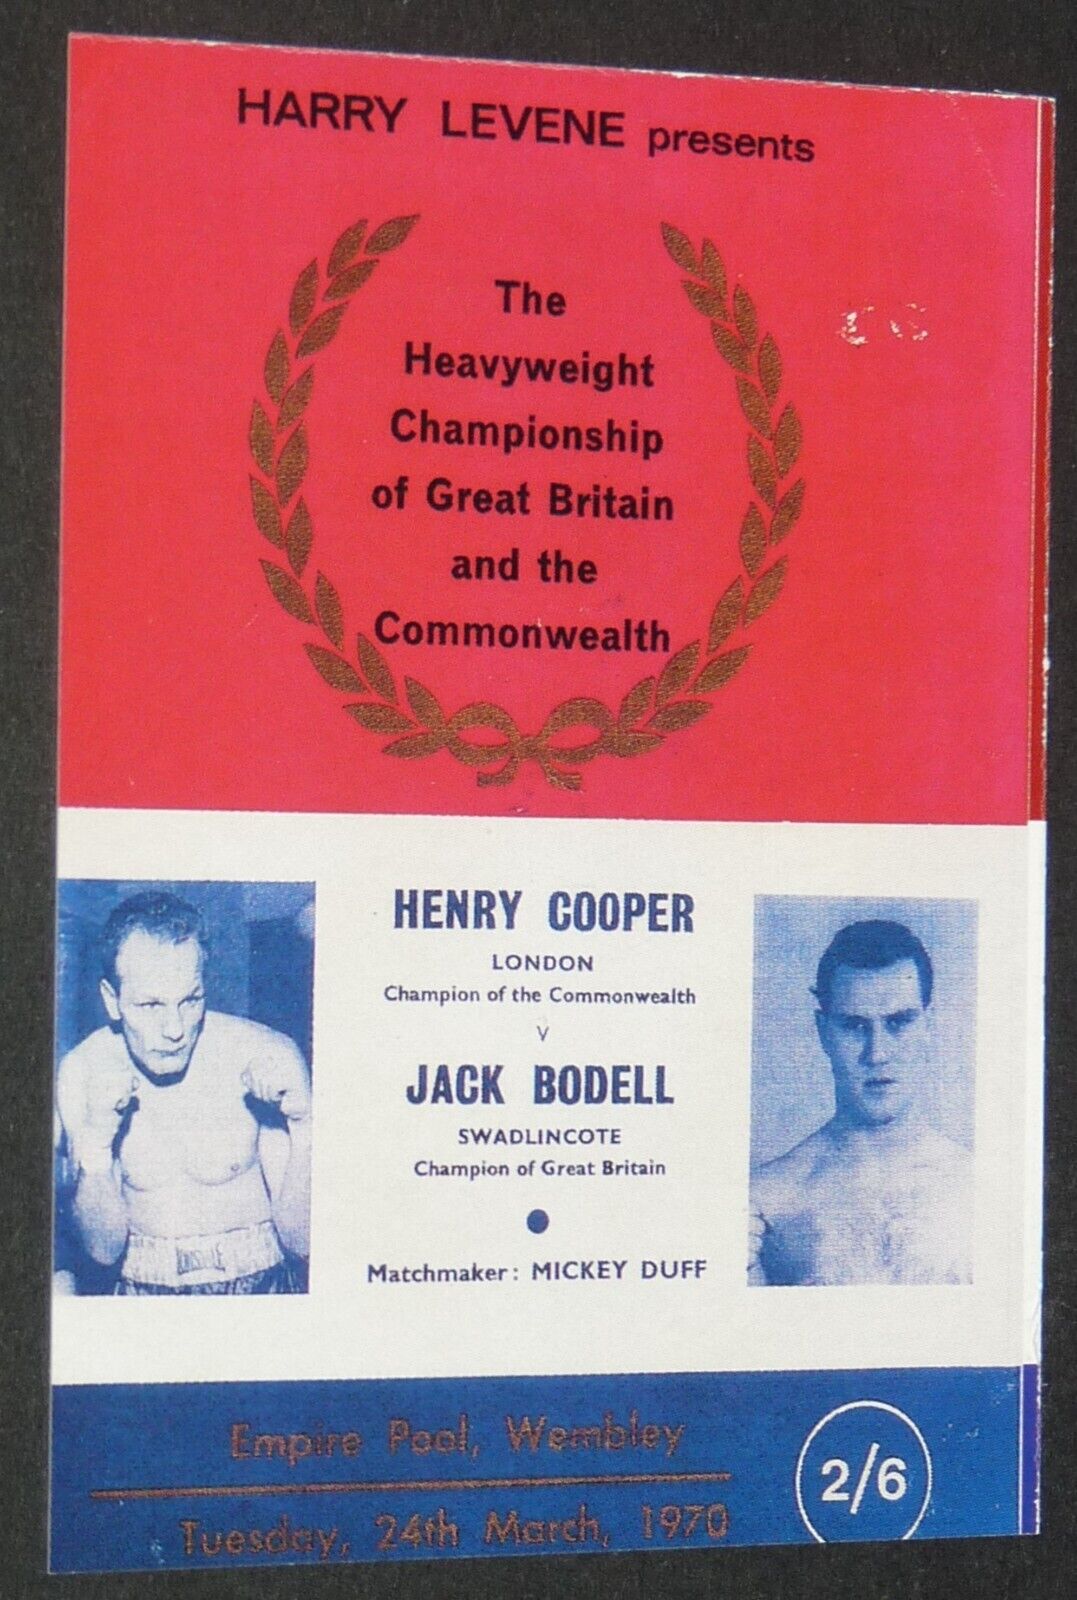 1997 SPORTING PROFILES CARD BOXING HENRY COOPER #38 BODELL 1970 HEAVYWEIGHTS